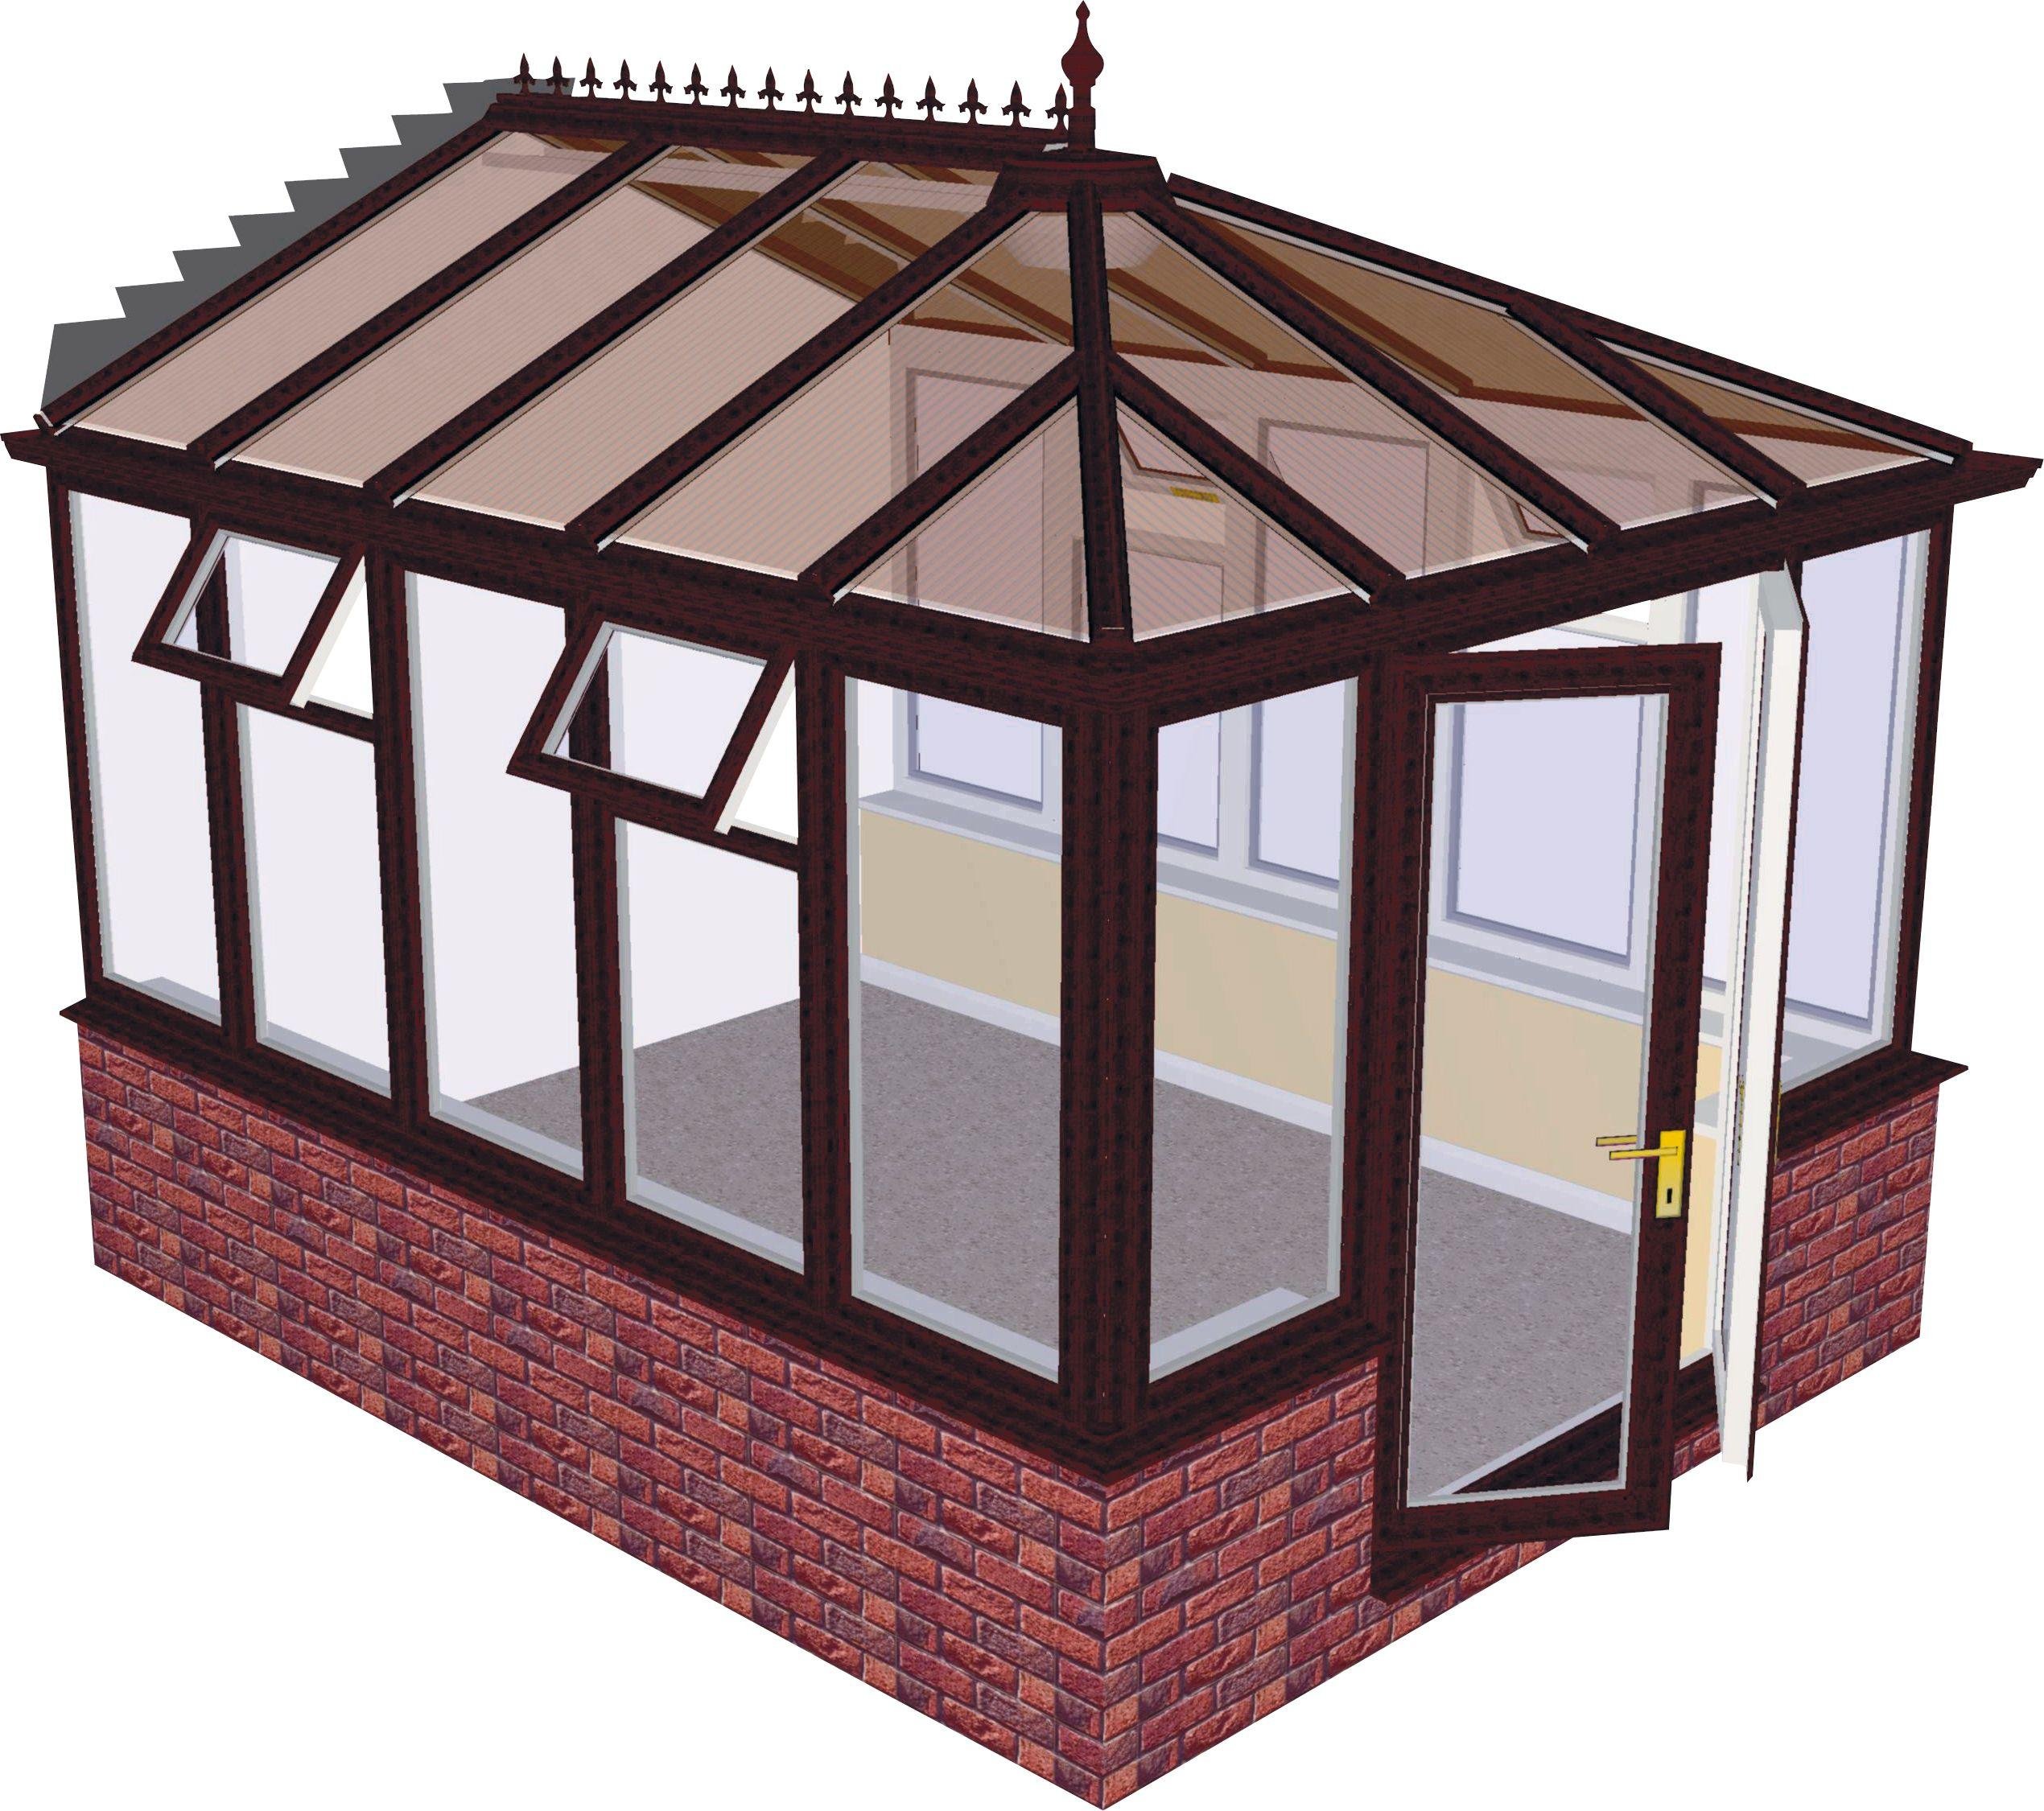 Edwardian Dwarf Wall Large Conservatory-Rosewood on White. Review